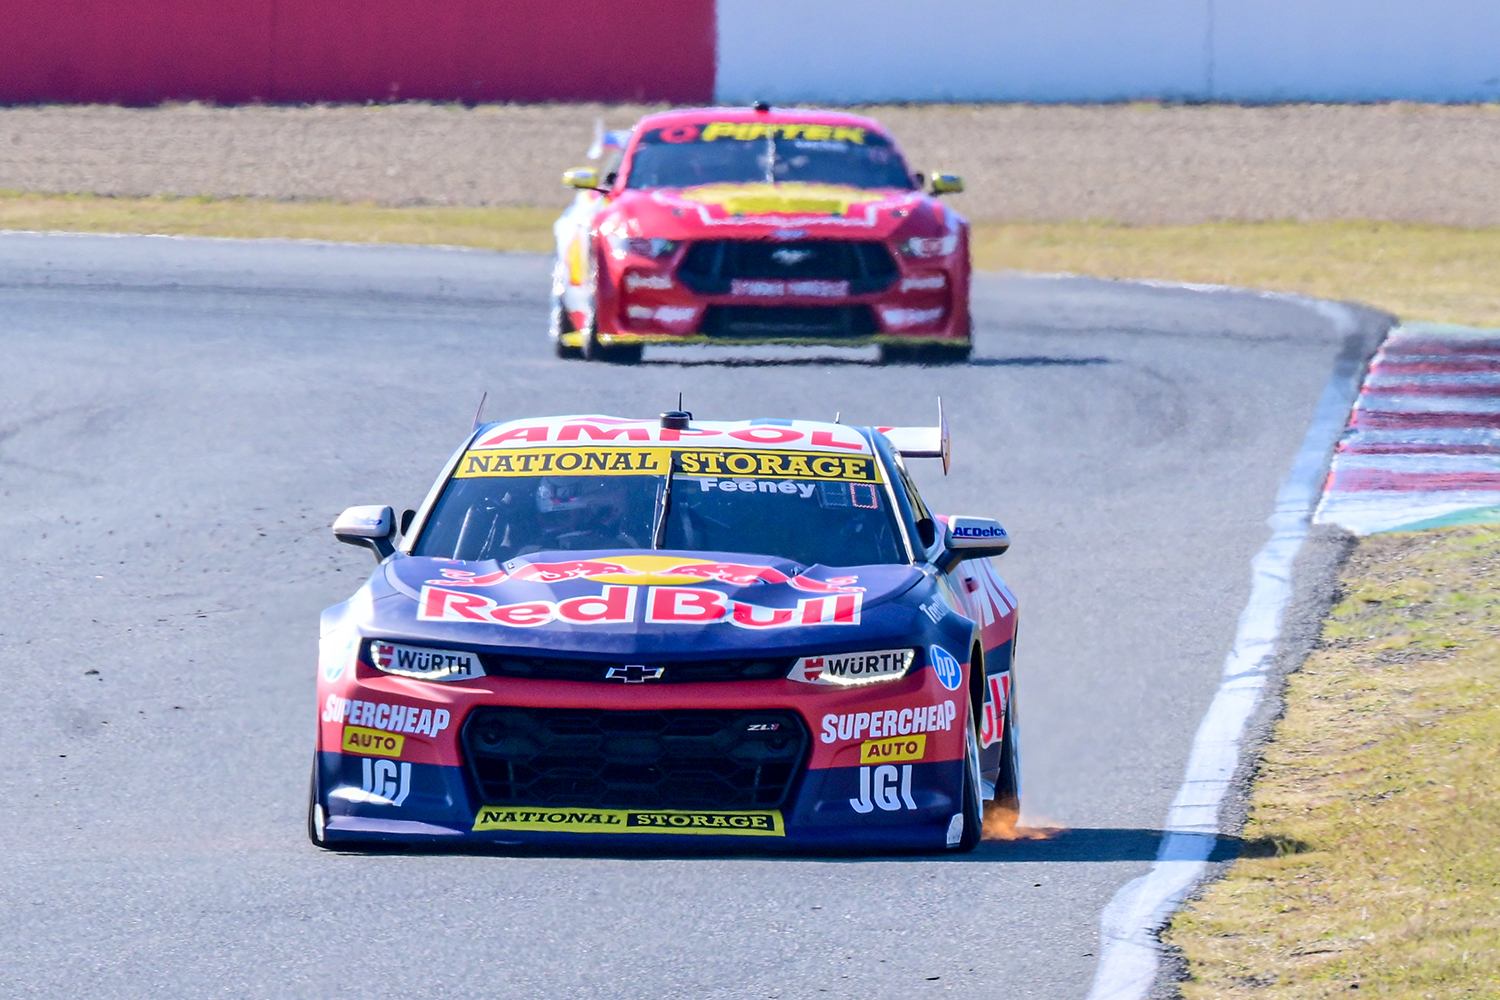 Gallery-Supercars-Championship-testing-Queensland-Raceway-12